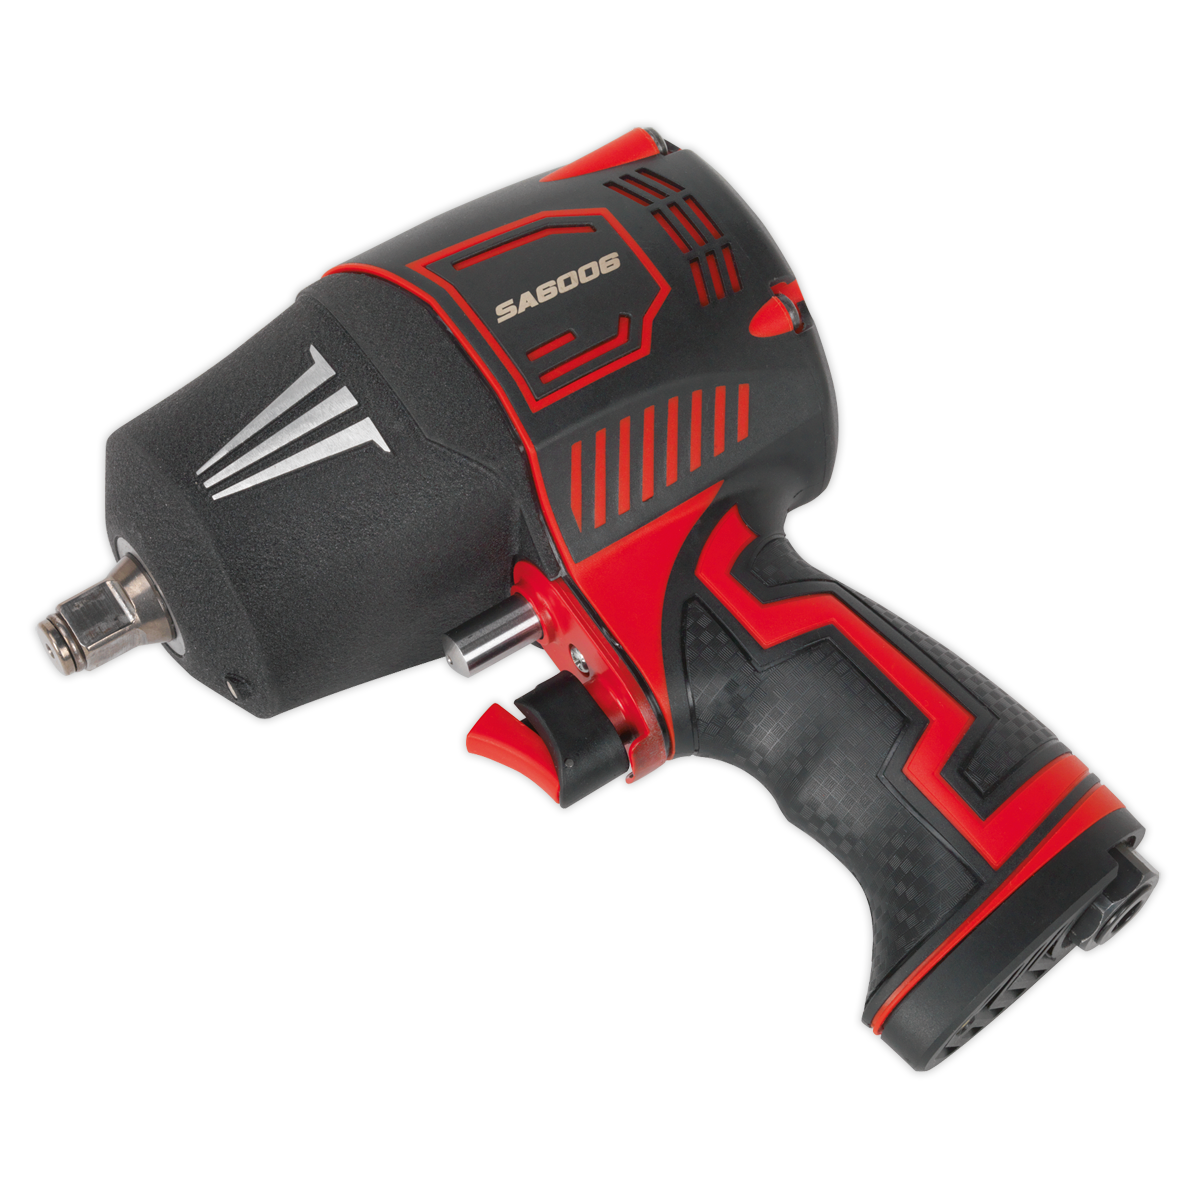 SEALEY - SA6006 Composite Air Impact Wrench 1/2"Sq Drive - Twin Hammer